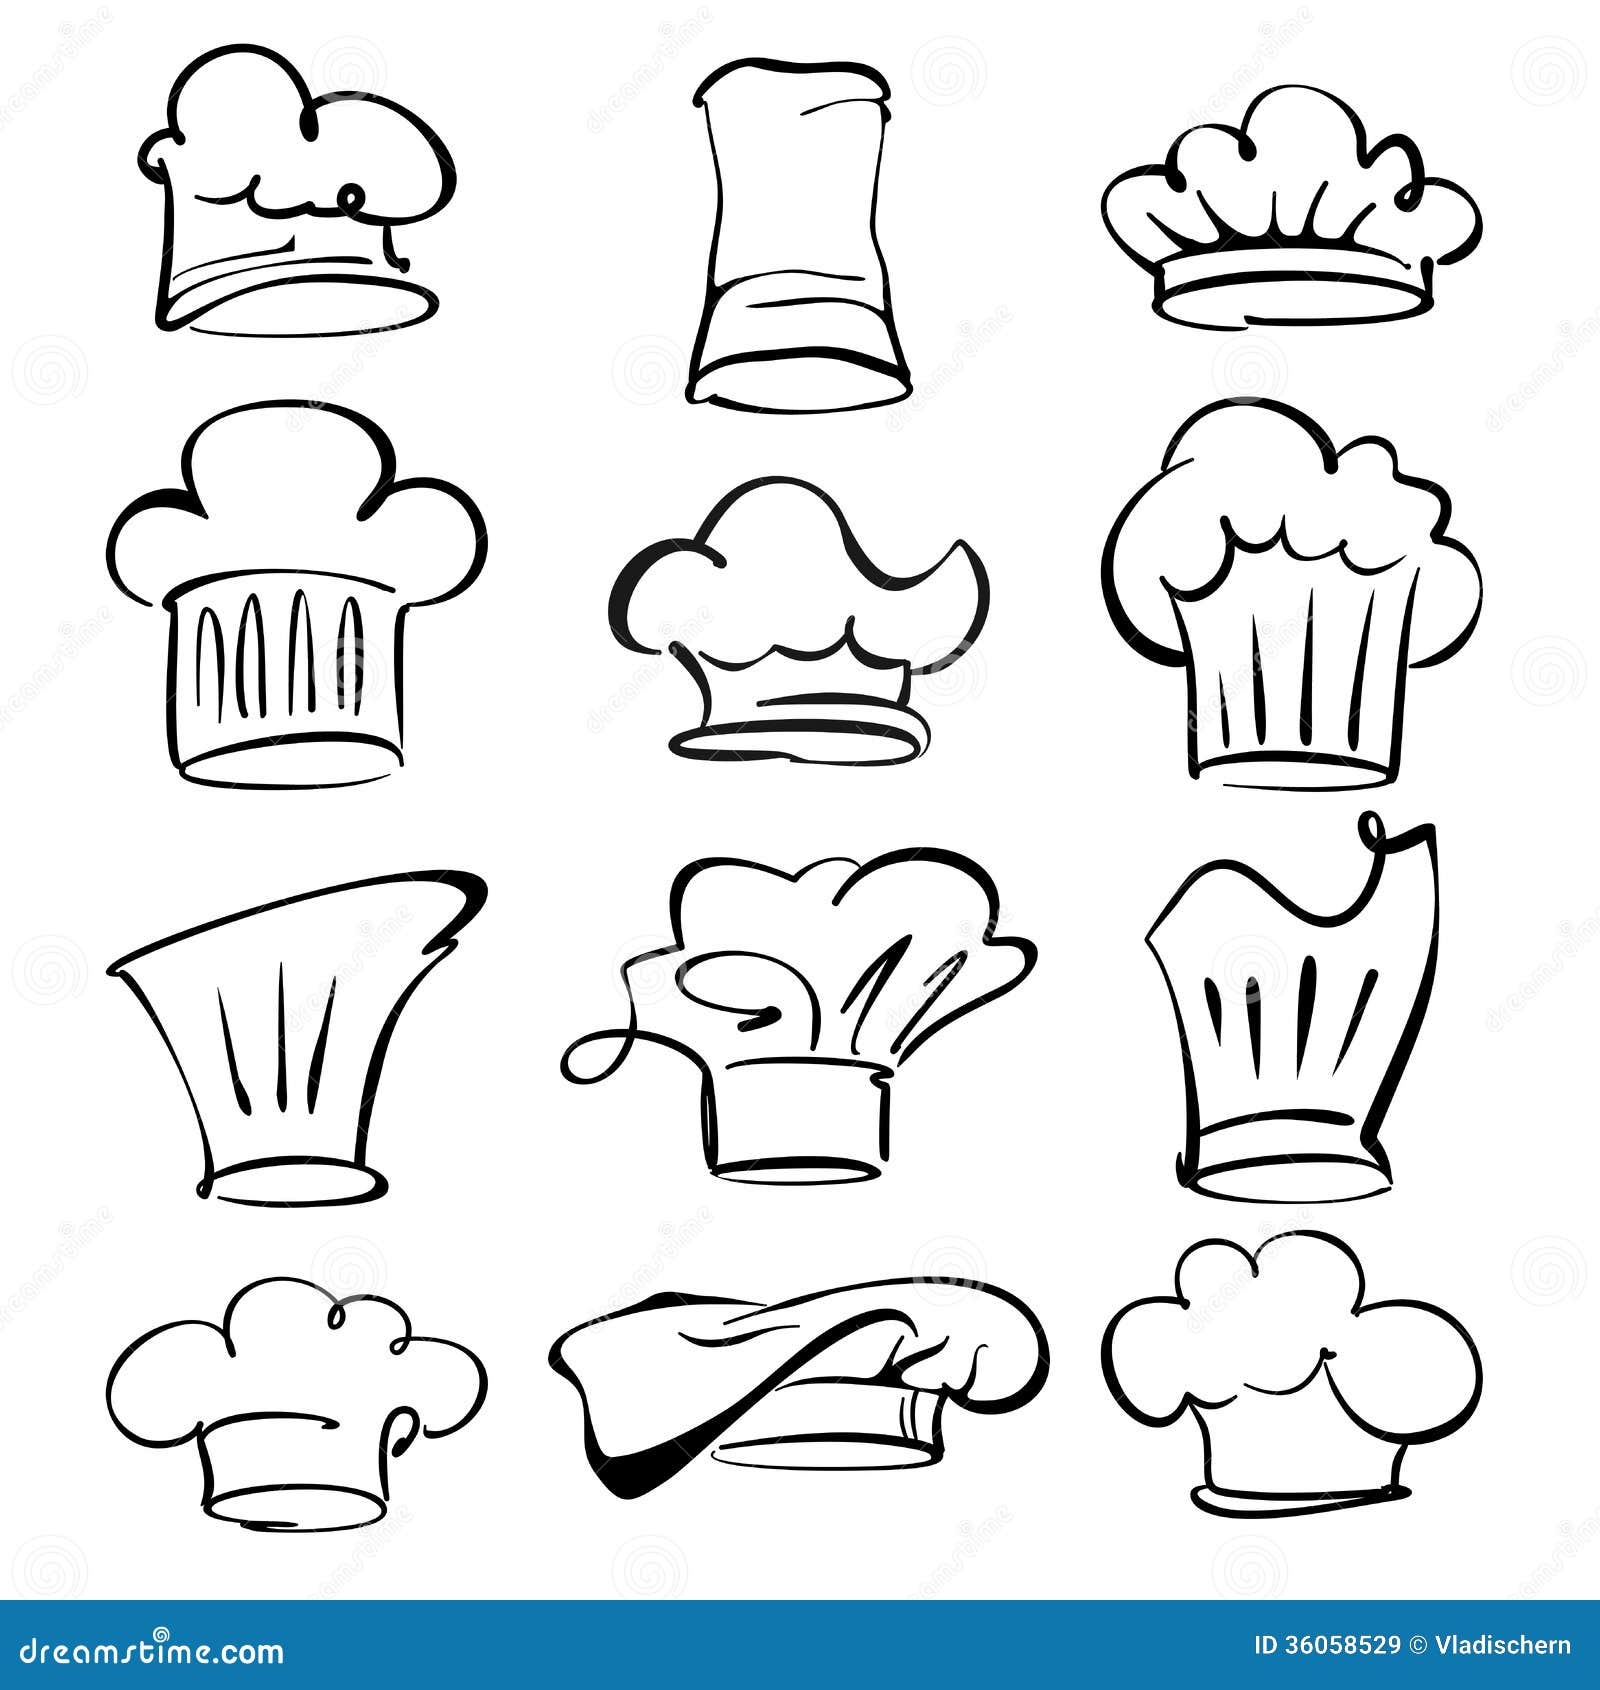 chef hat clipart vector - photo #42